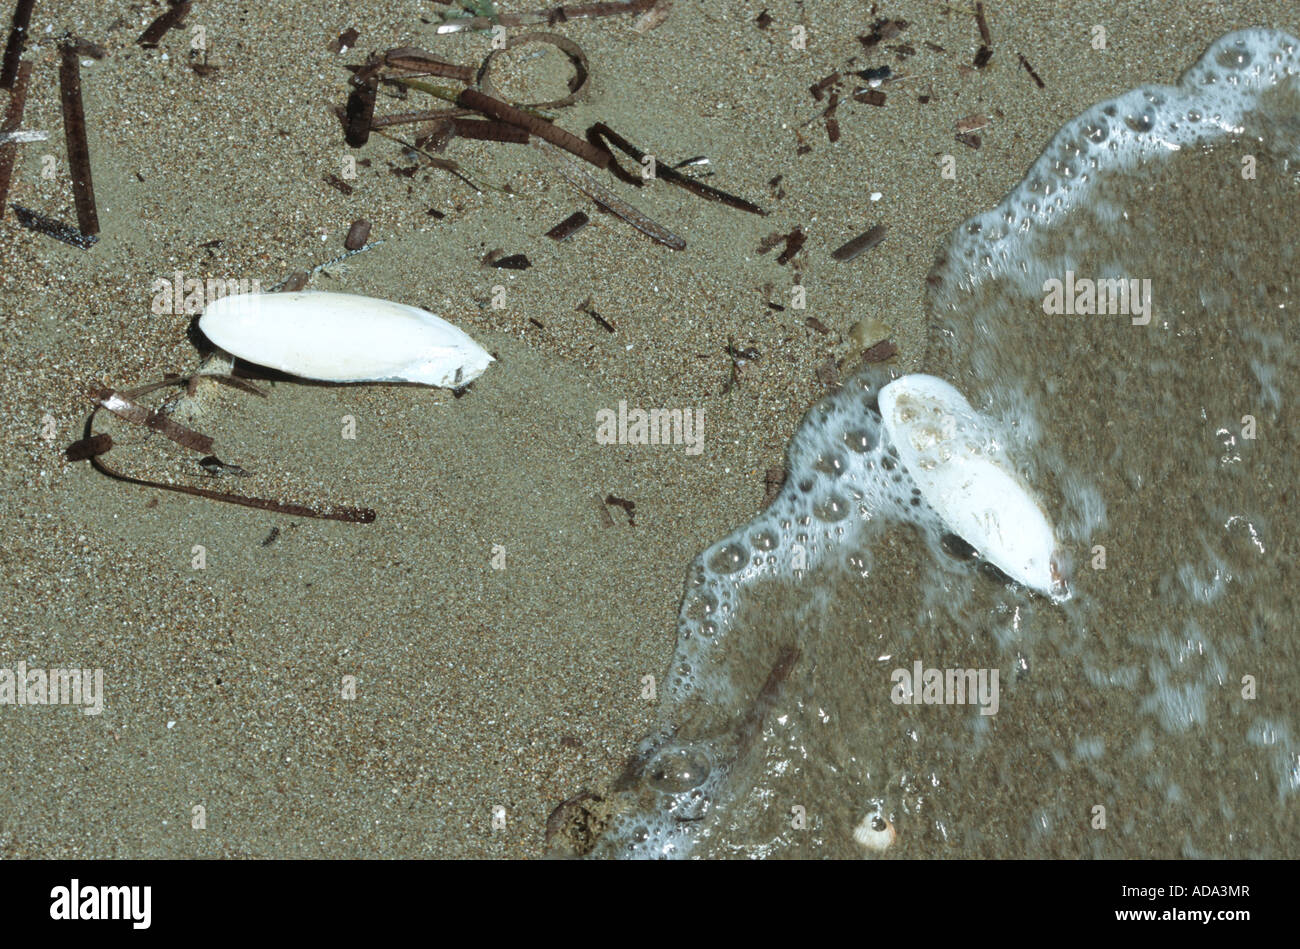 common cuttlefish (Sepia officinalis), skeletons on the shore Stock Photo